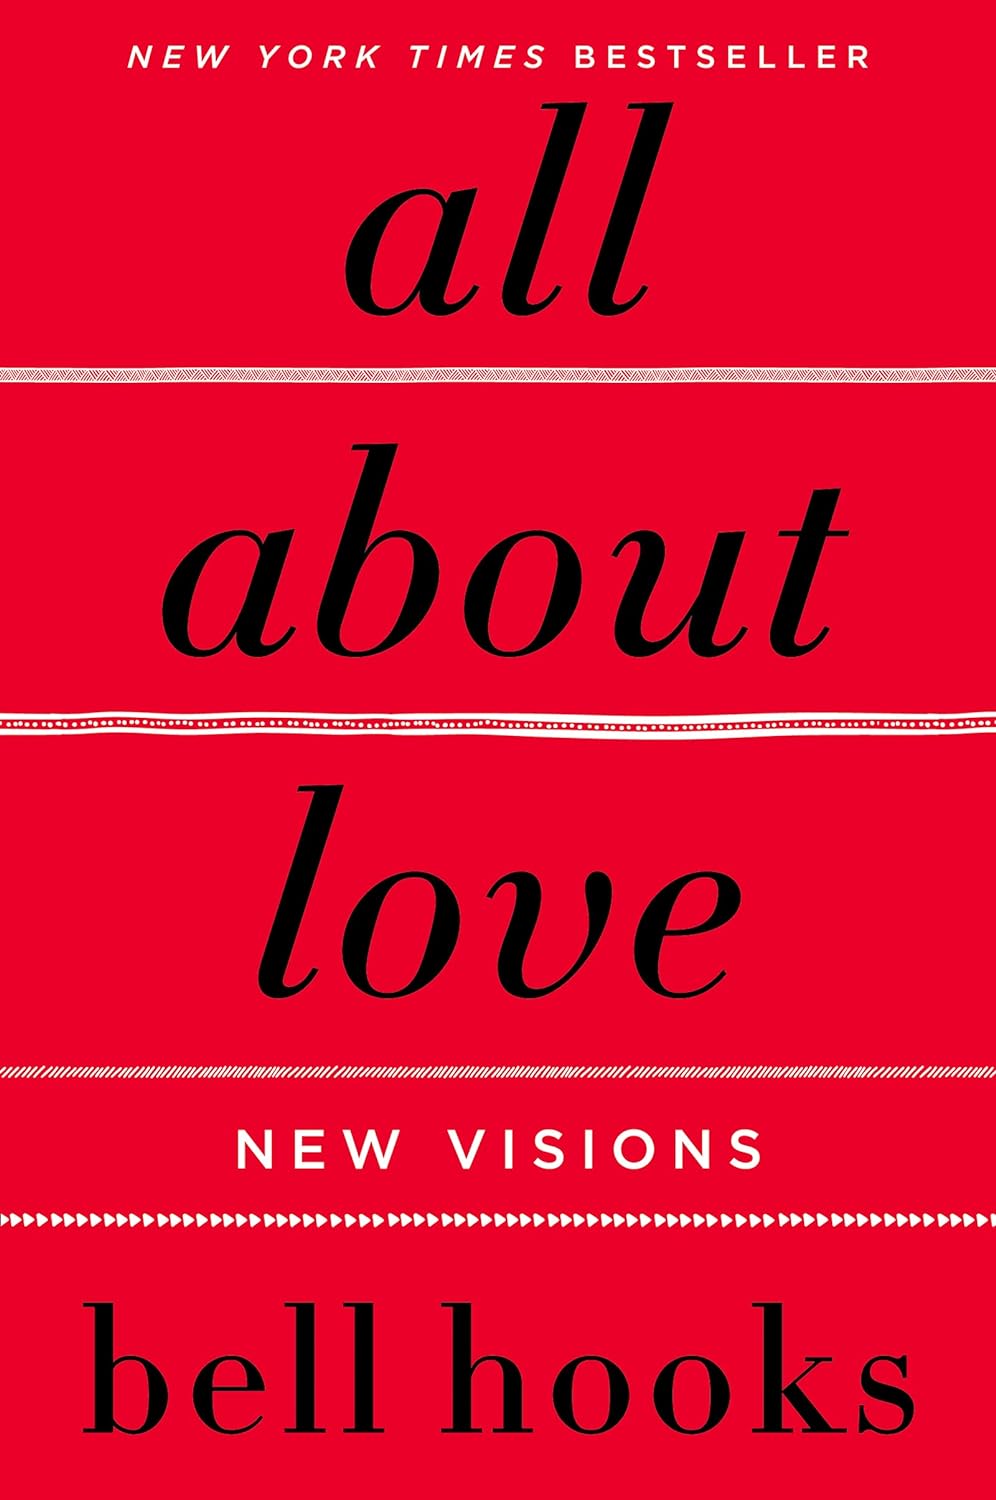 One of our recommended books is All About Love by bell hooks